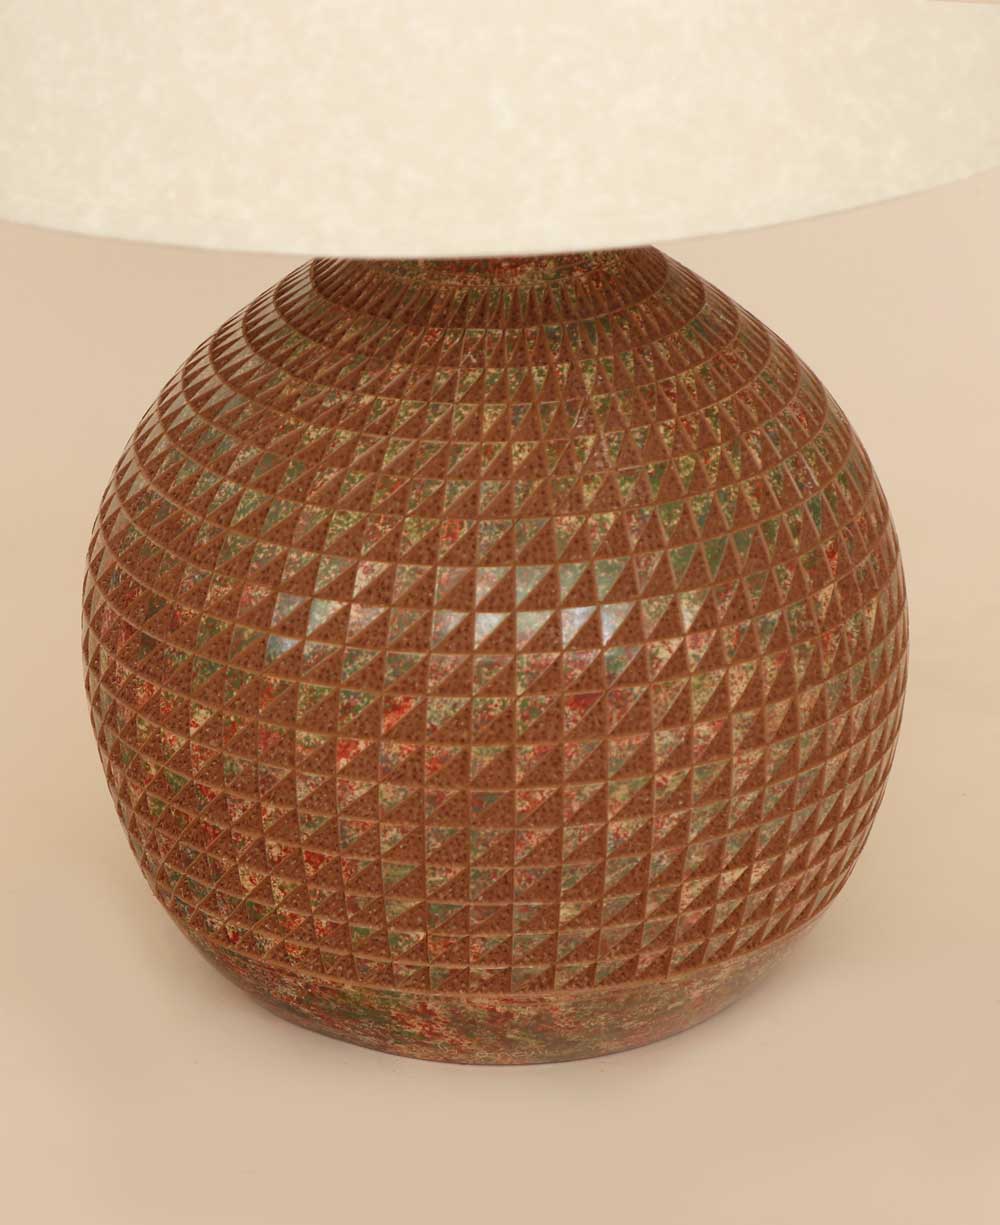 Artisan-made Round Ceramic Table Lamp with Geometric Etching, Nicaragua - Lamps